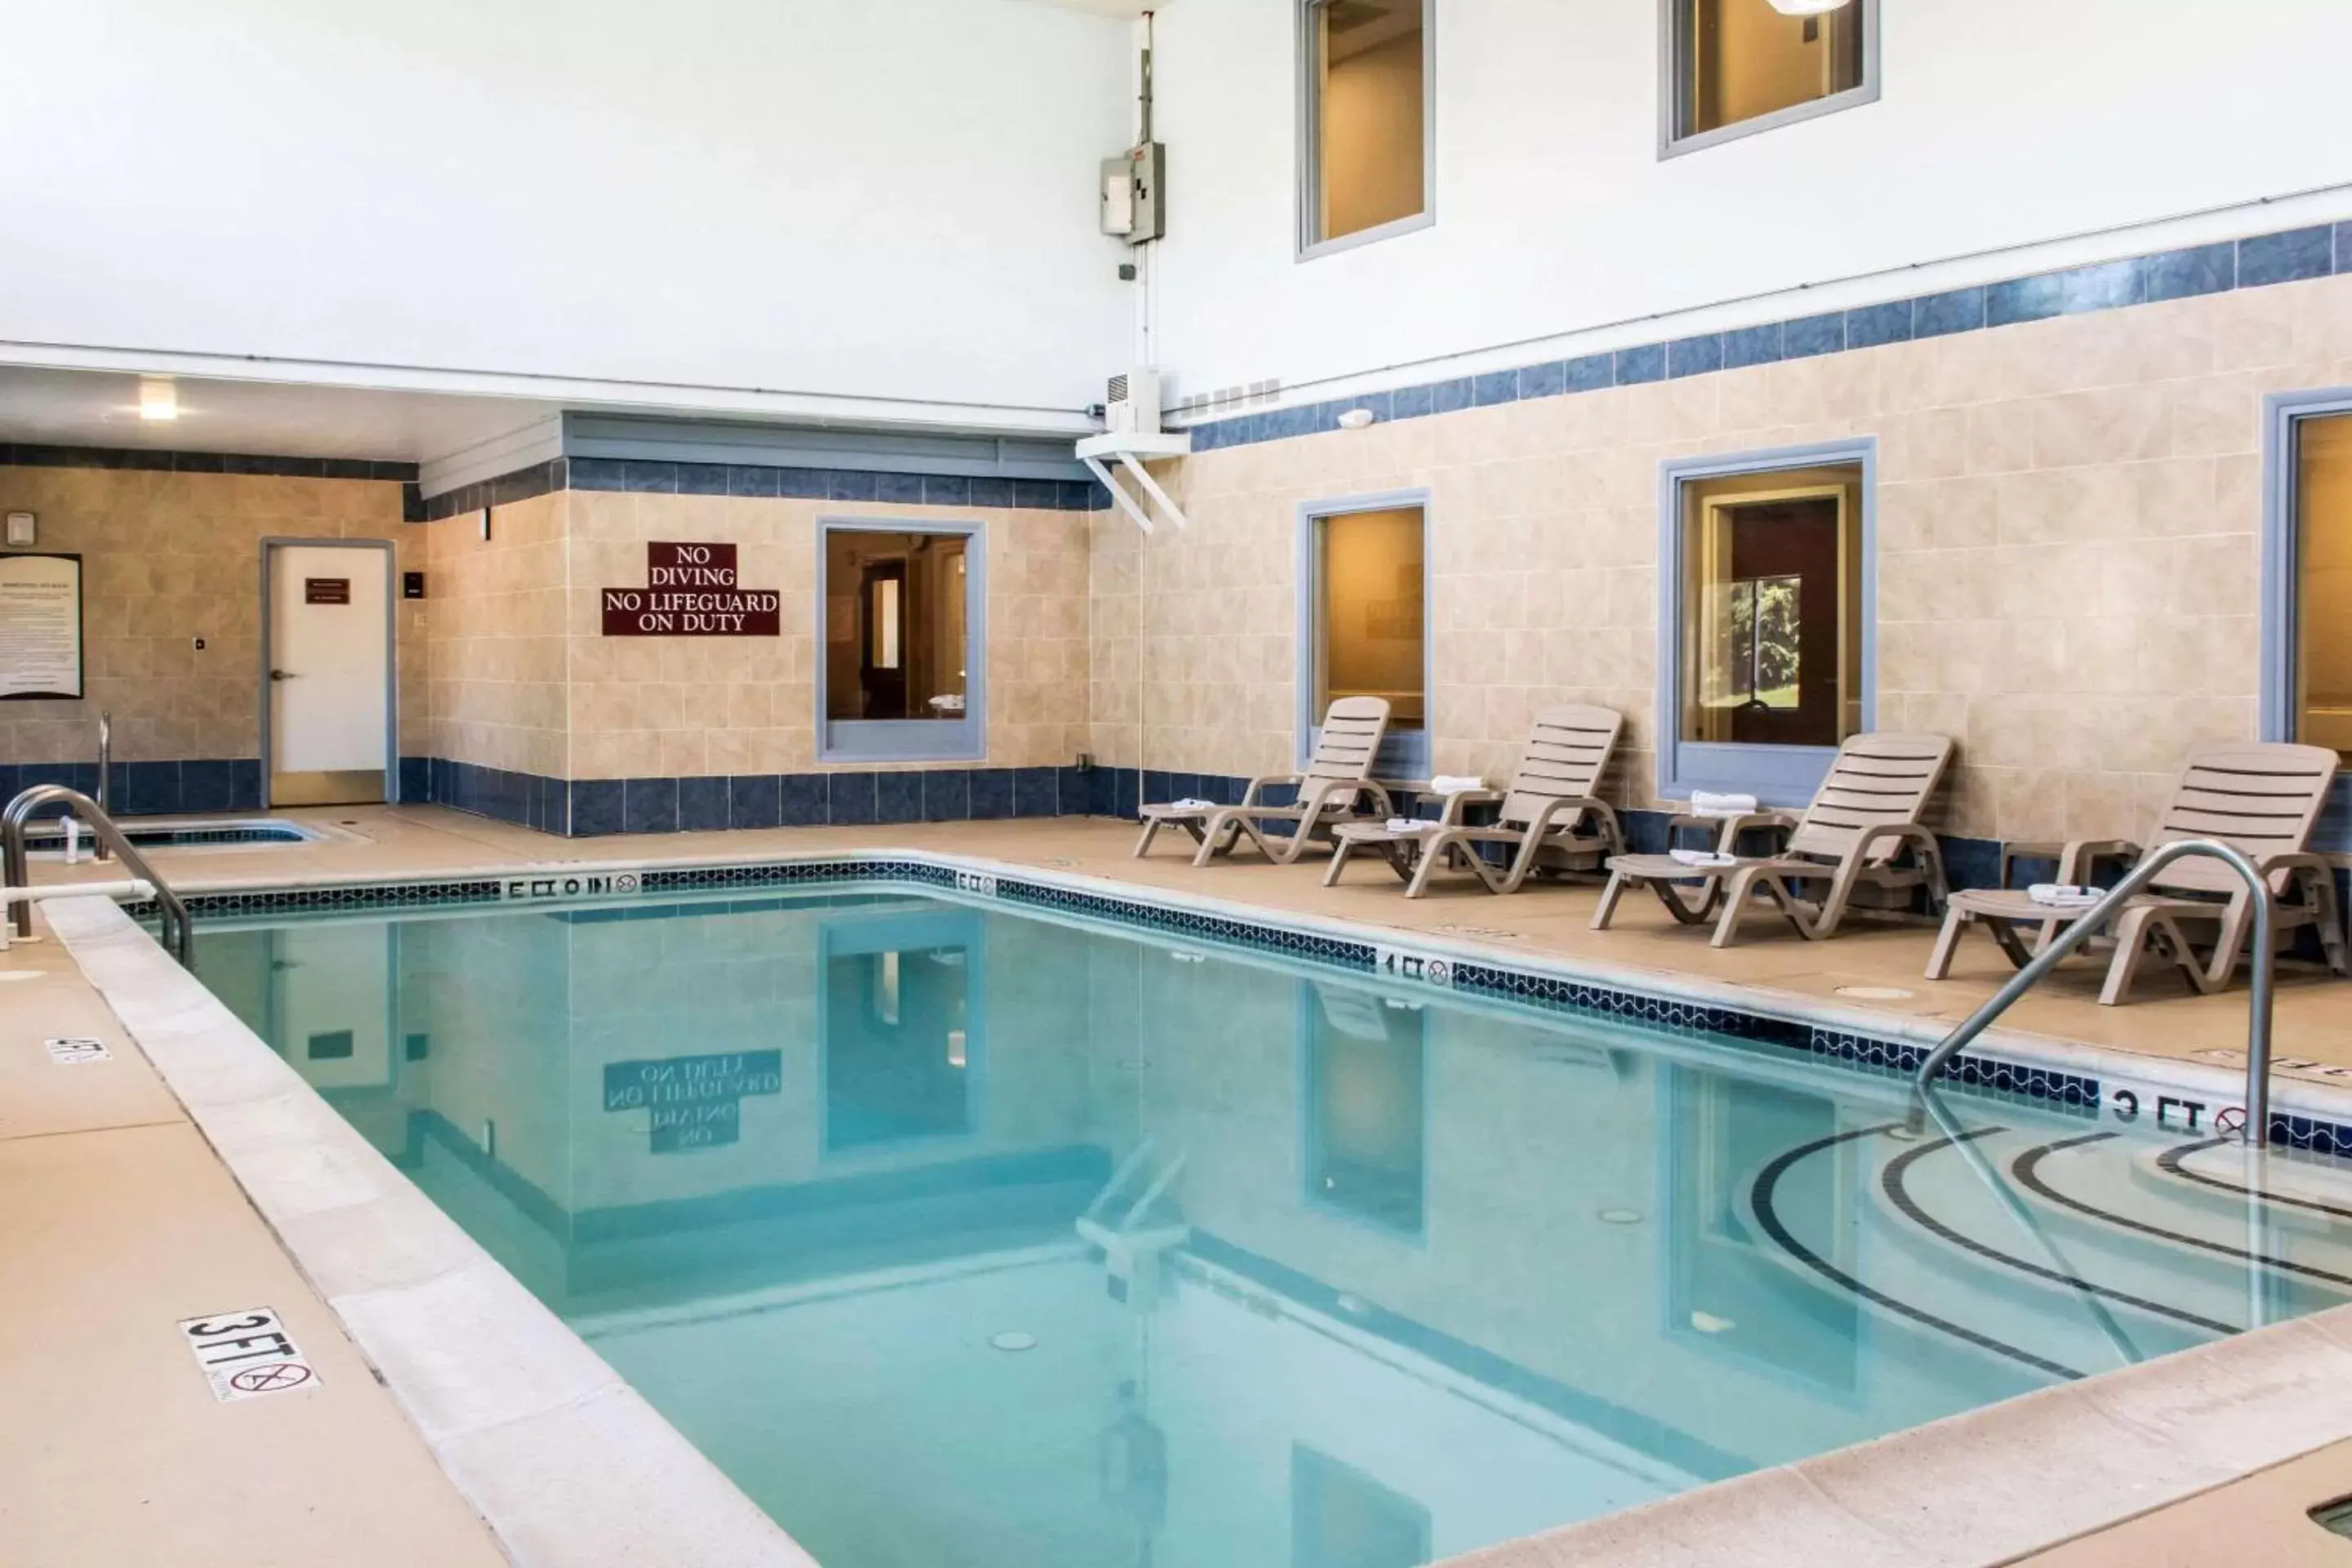 On site, Swimming Pool in Comfort Inn Lancaster County